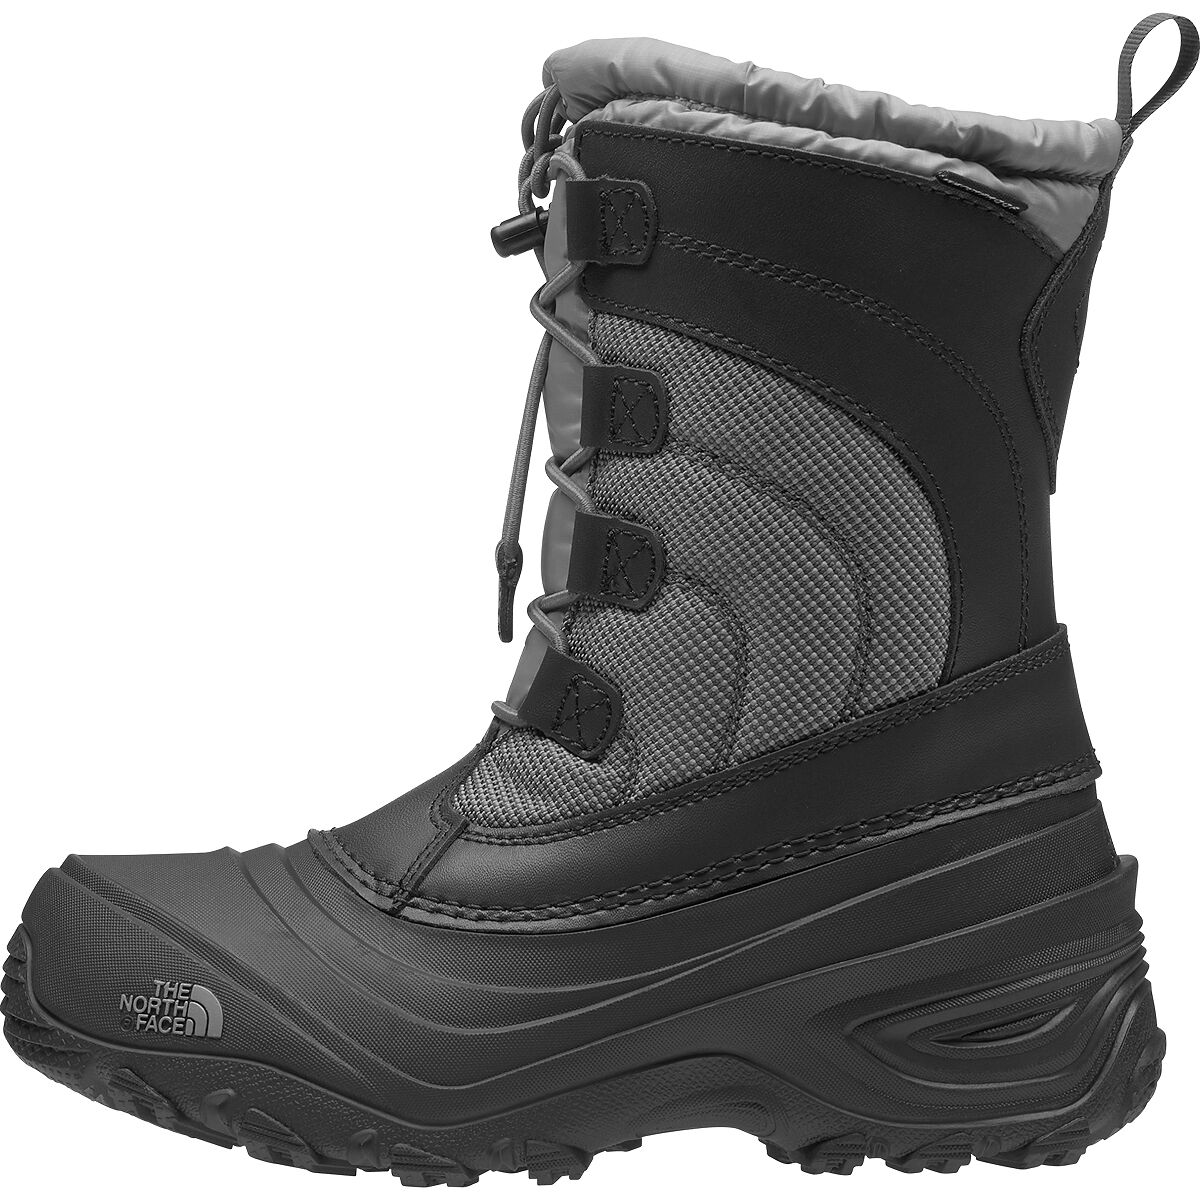 north face alpenglow boots